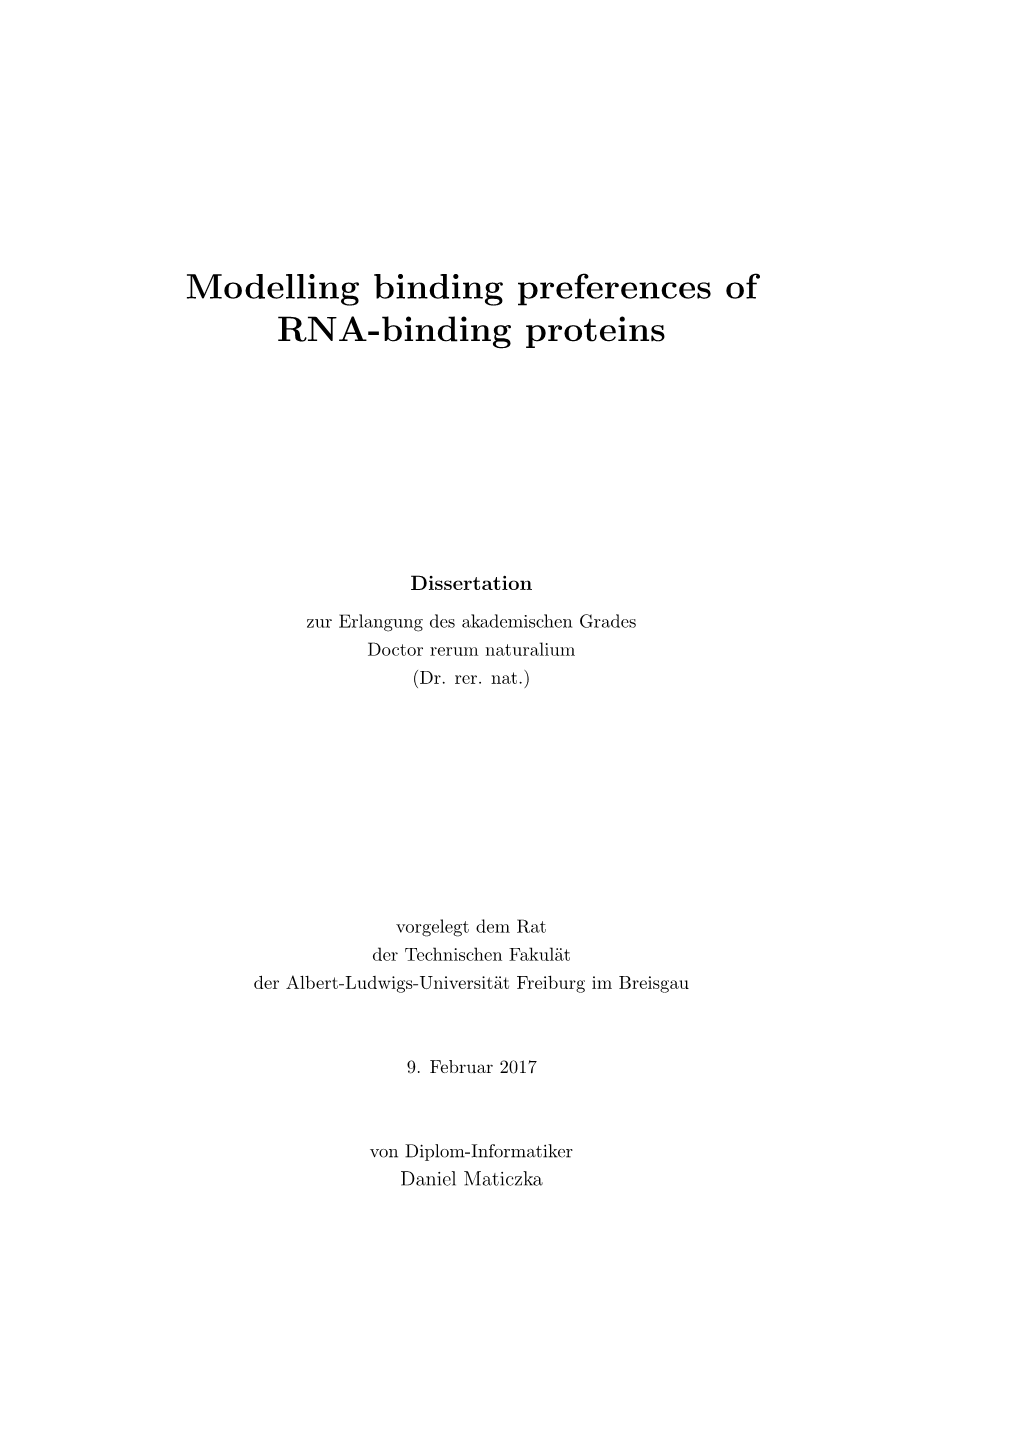 Modelling Binding Preferences of RNA-Binding Proteins